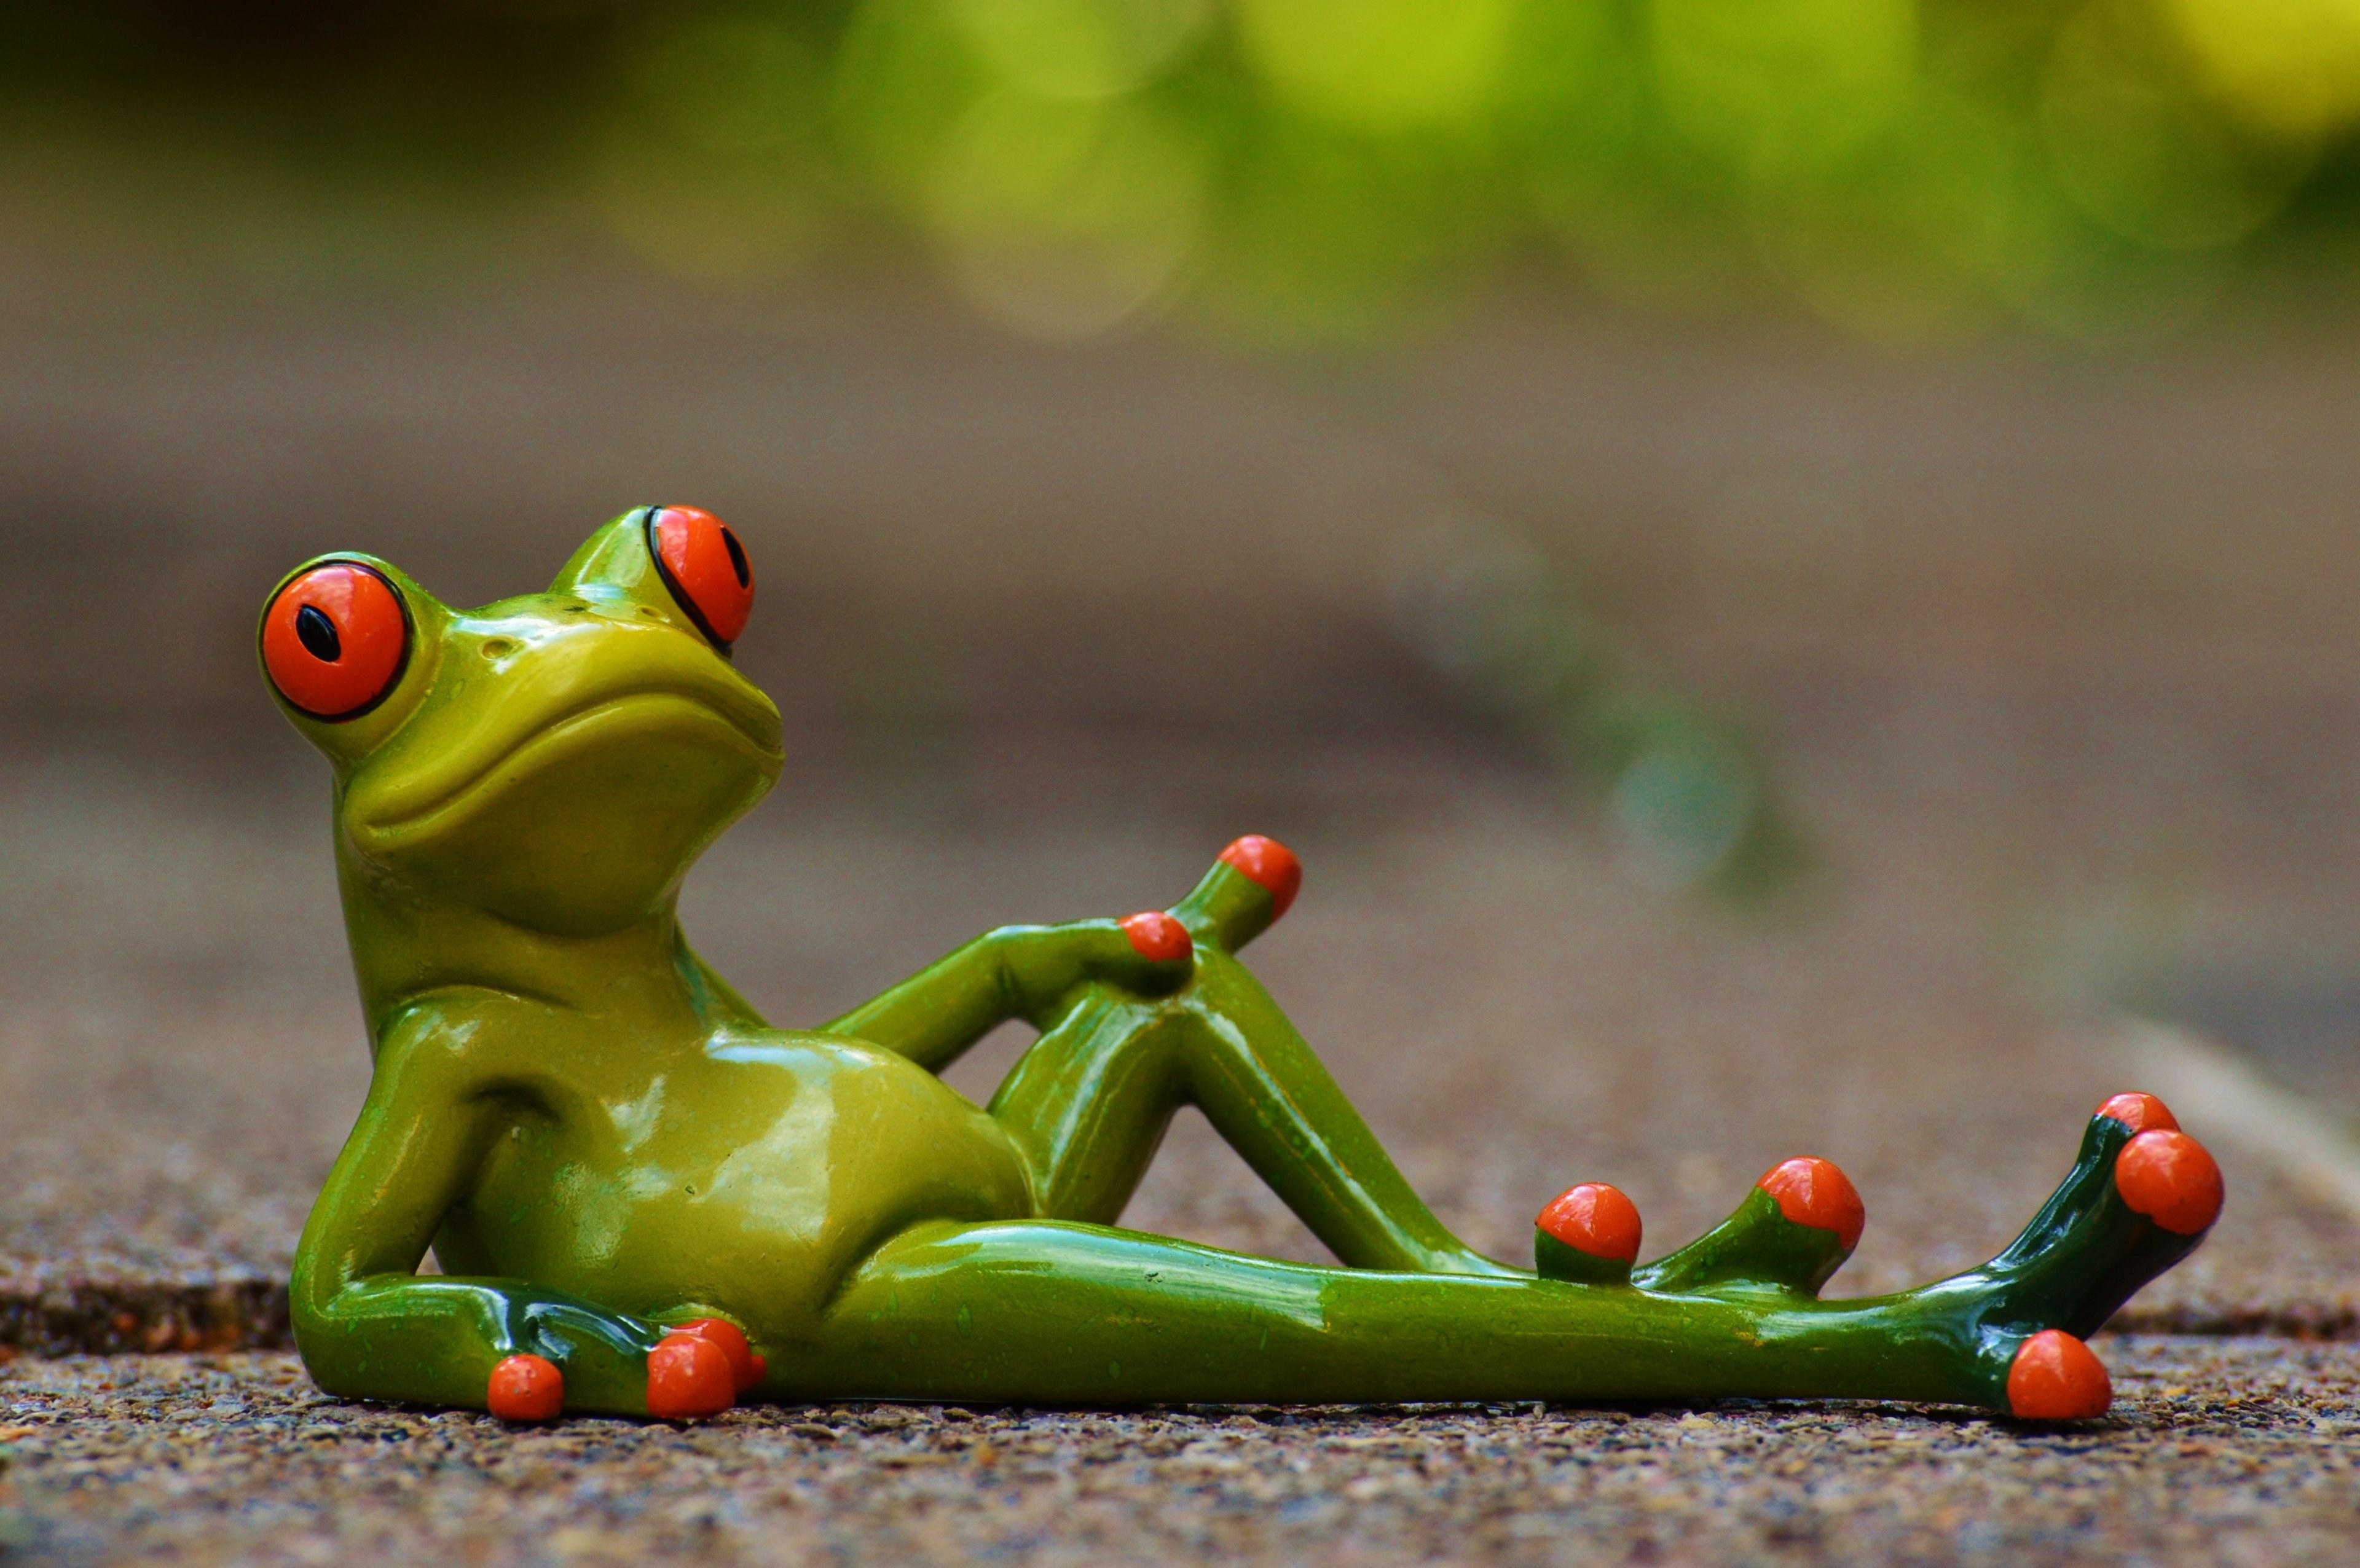 Wallpaper ID 291393 frog lying relaxed cute rest figure funny